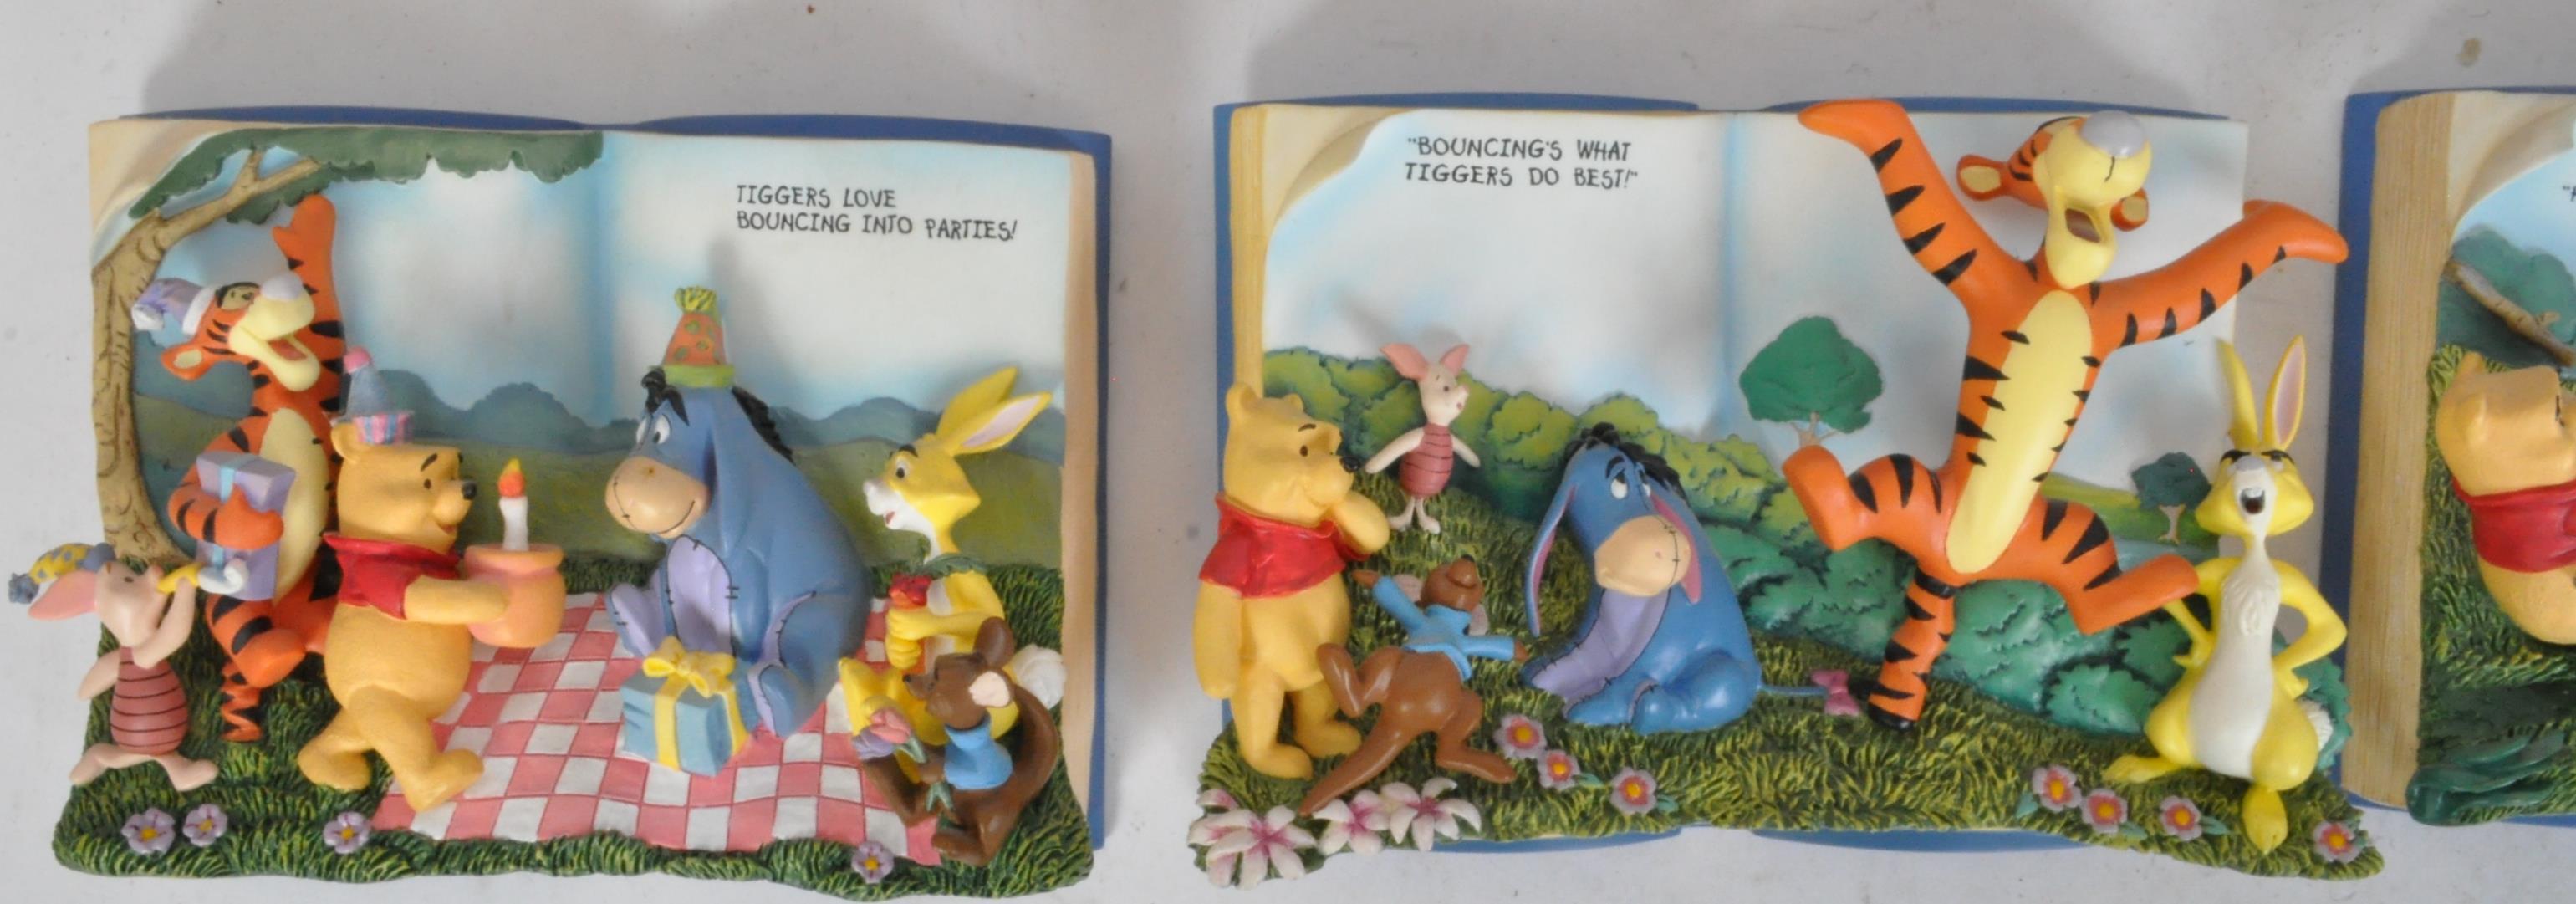 COLLECTION BRADFORD EXCHANGE WINNIE THE POOH STORYBOOK PLAQUES - Image 5 of 10